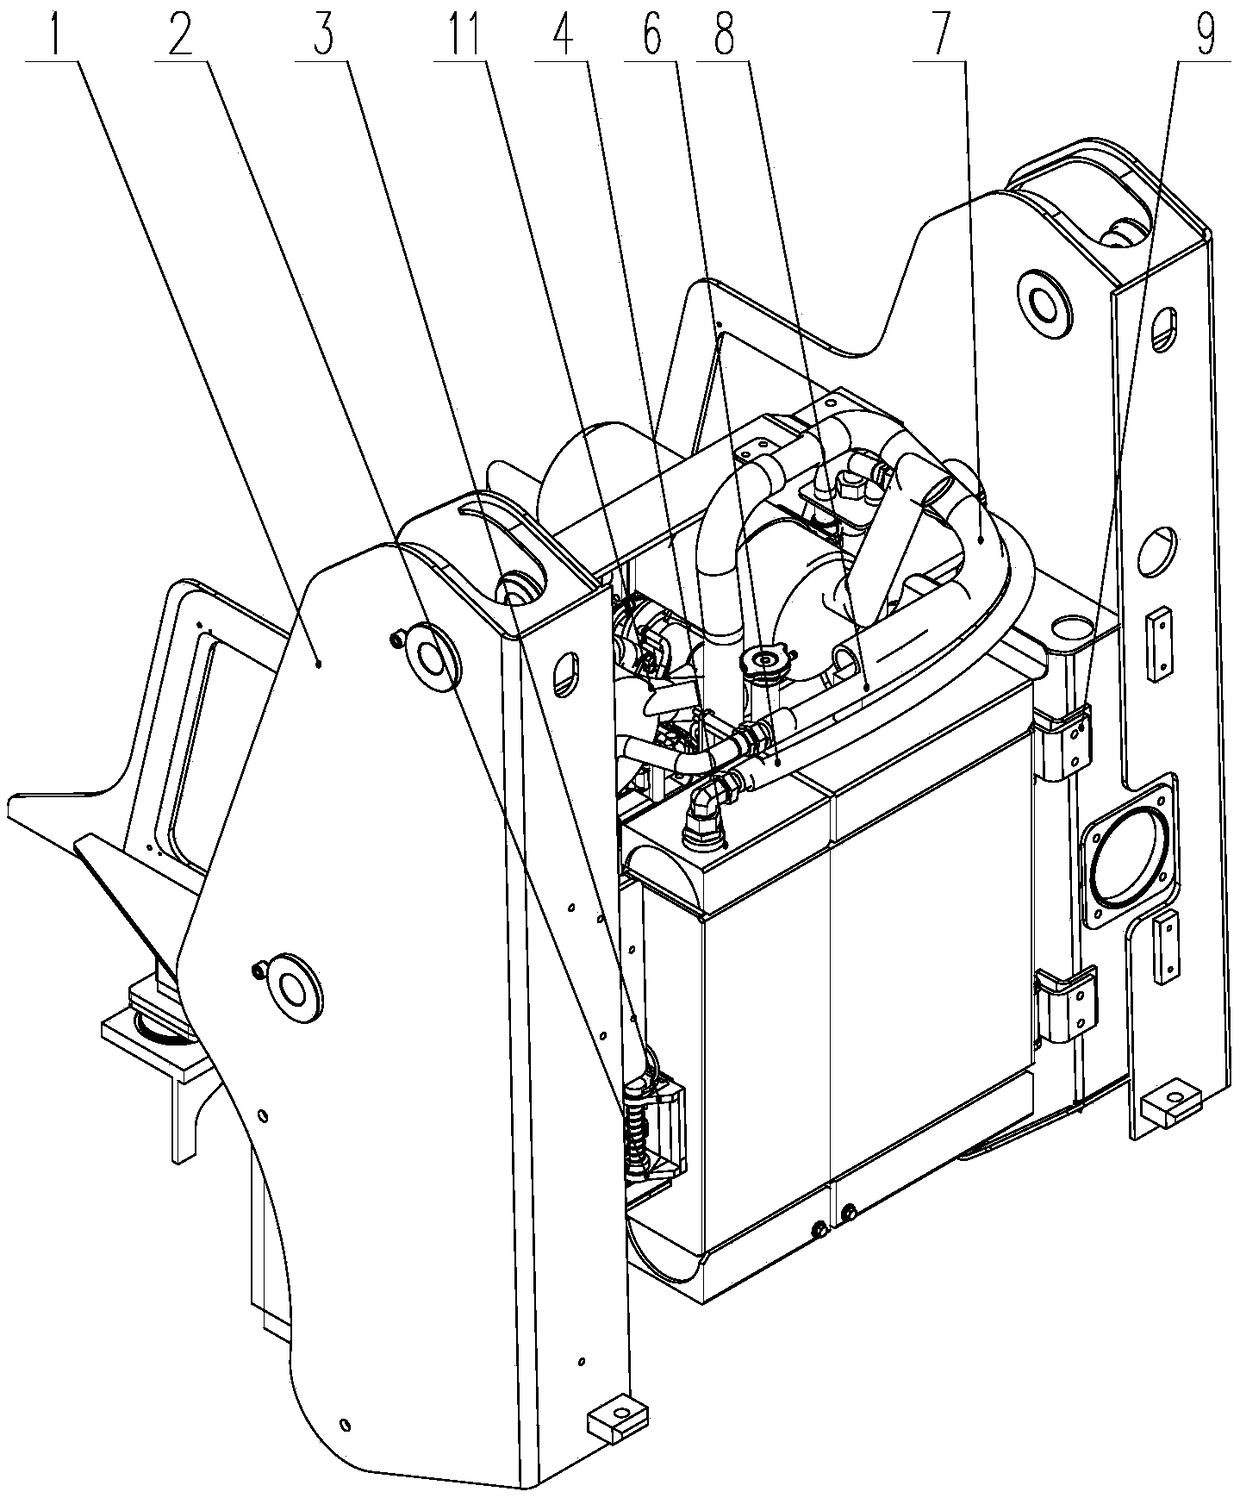 Heat dissipating device of skid steer loader